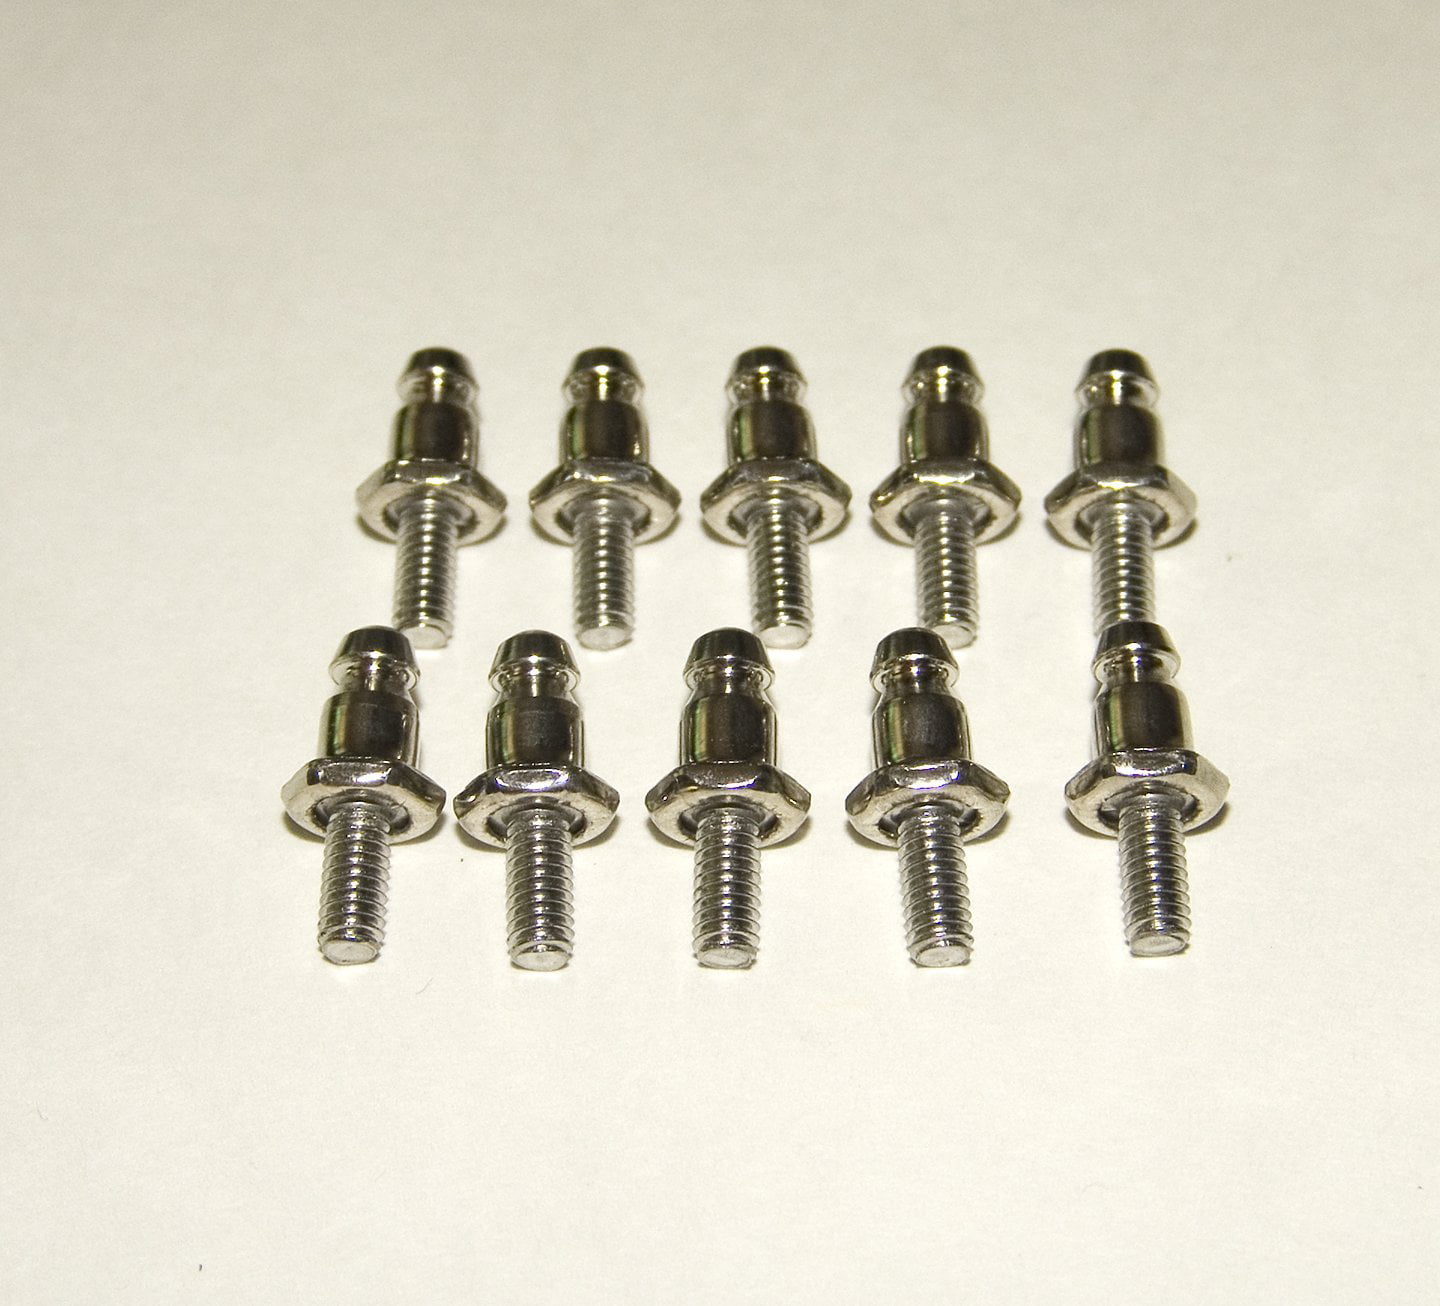 Lift The Dot Stud Nickel Brass with a #8-32 3/8" Stainless Machine Screw 10 Pc. 